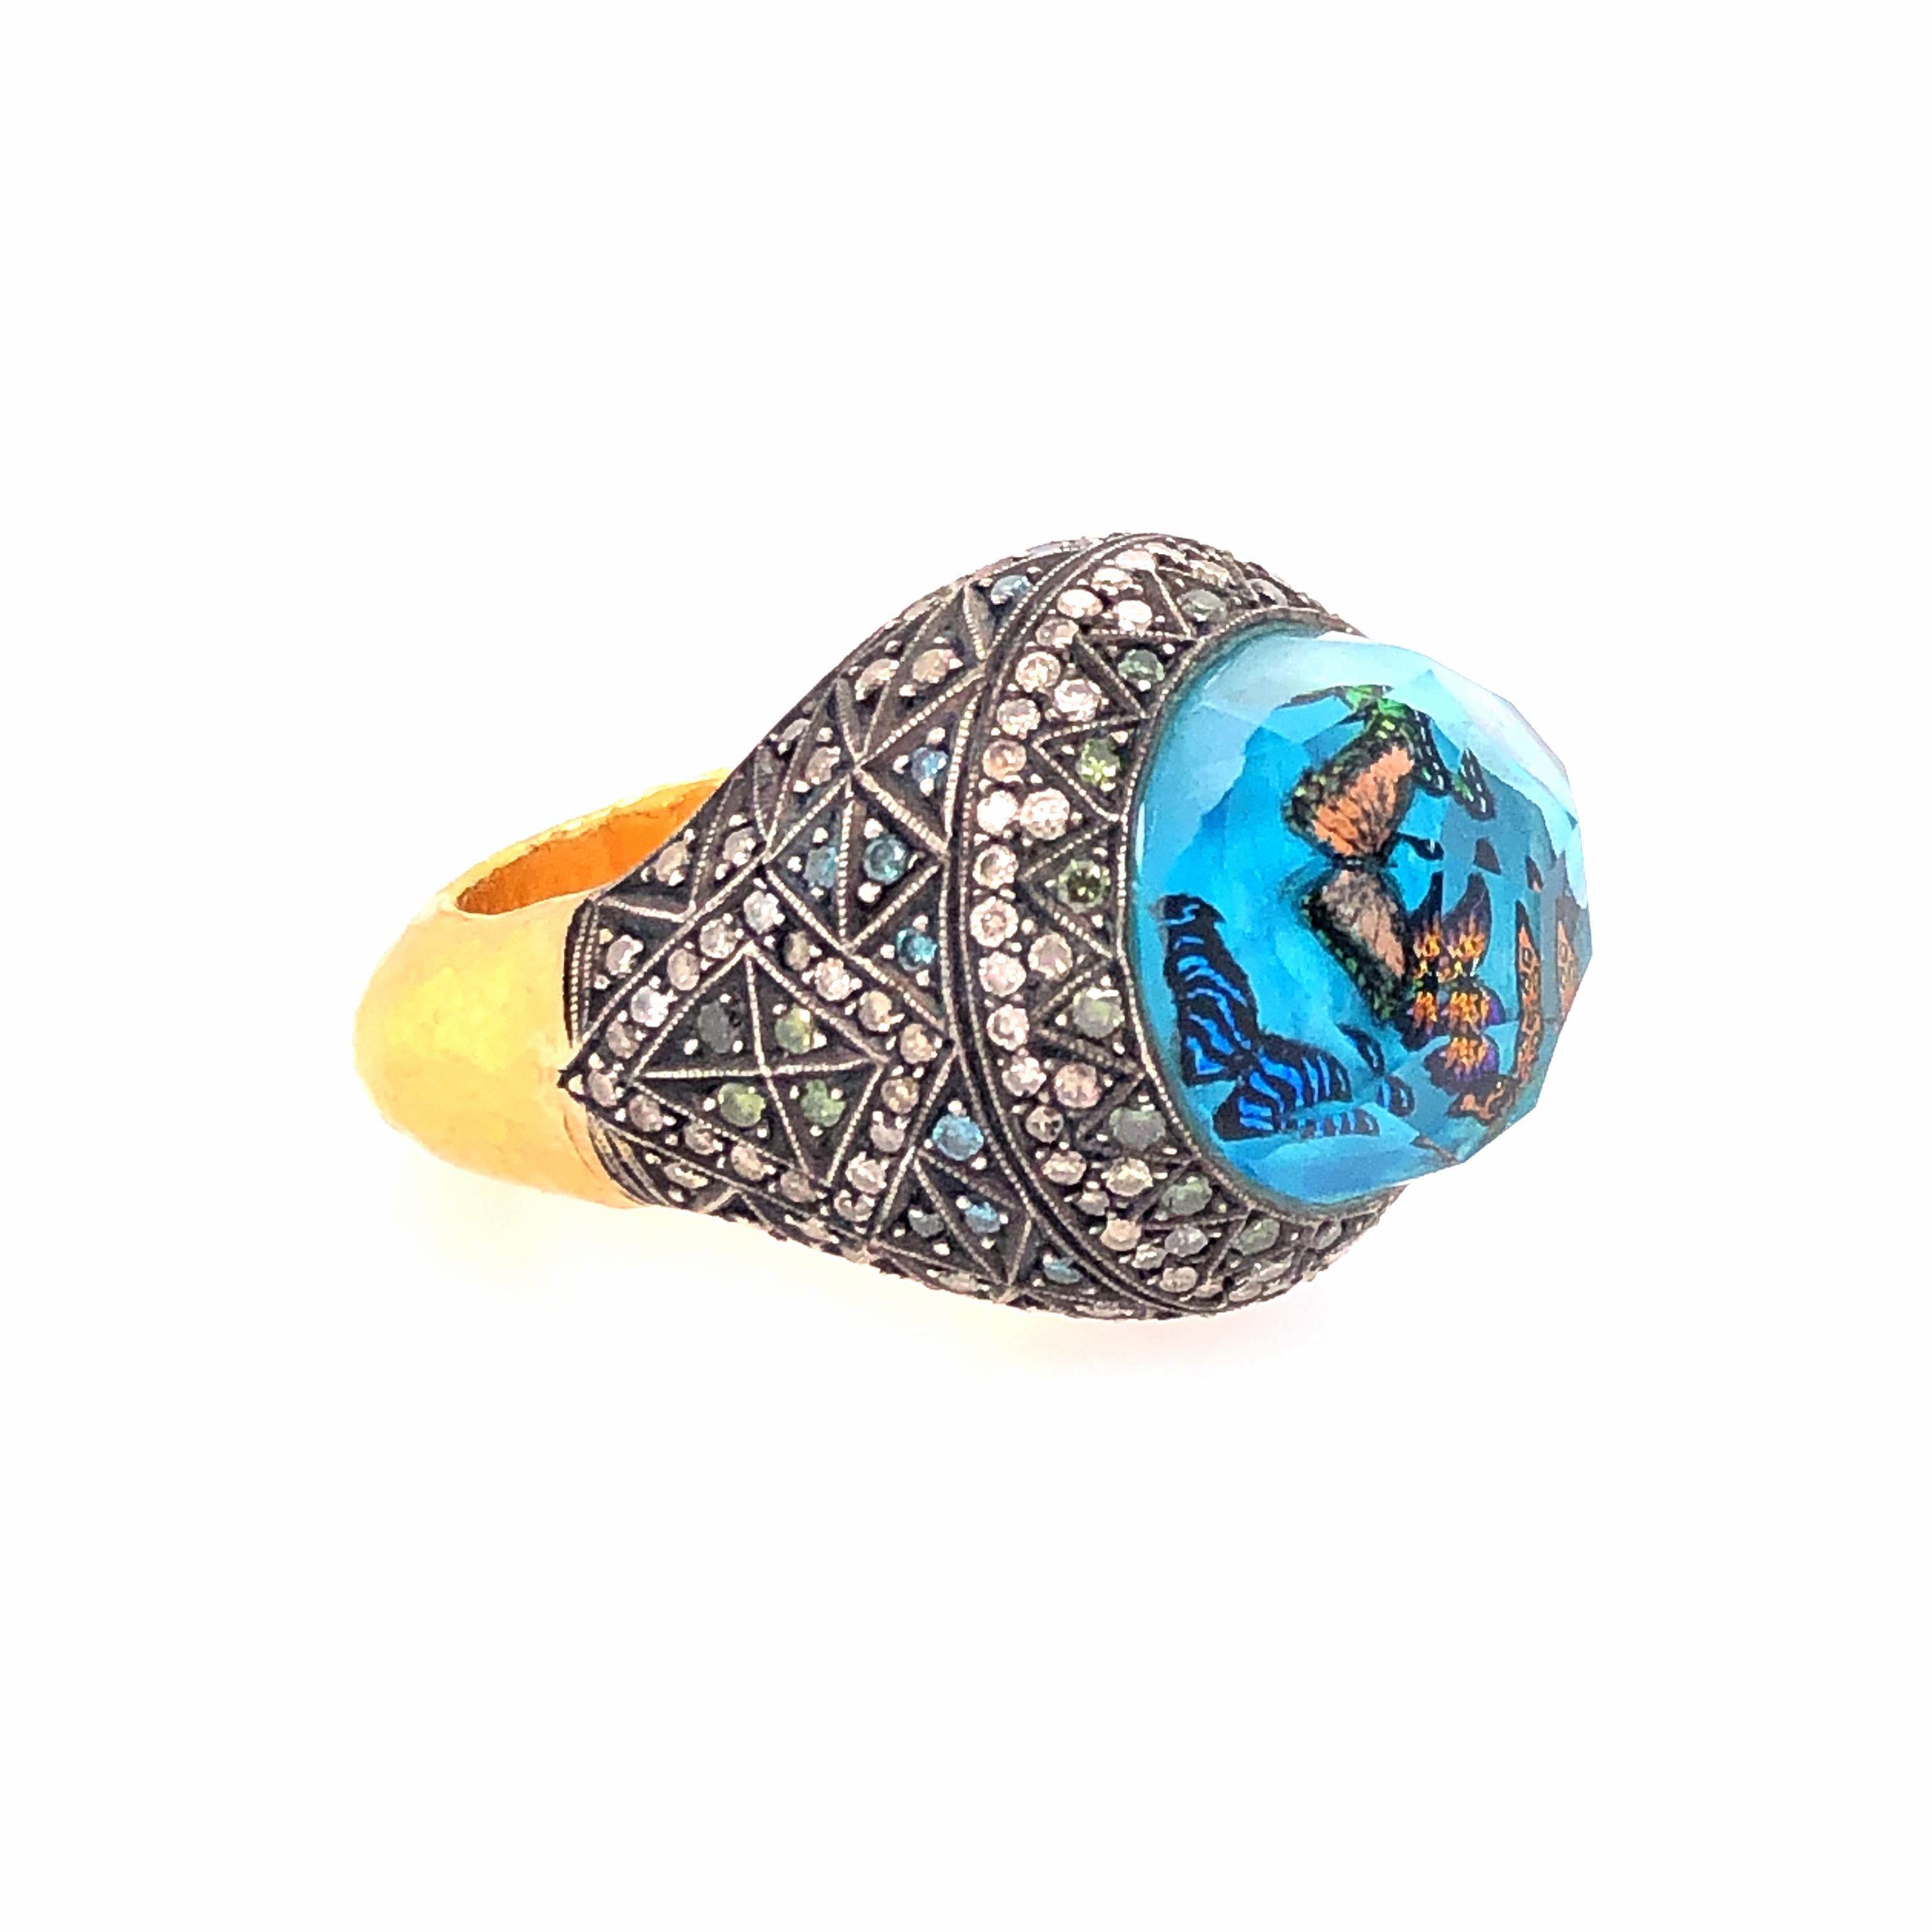 Masterfully crafted butterflies are layered in the carved centerpiece while diamonds create geometric patterns around the shoulders of this thick 22Kyellow gold ring. 

Size: 7.5-8

